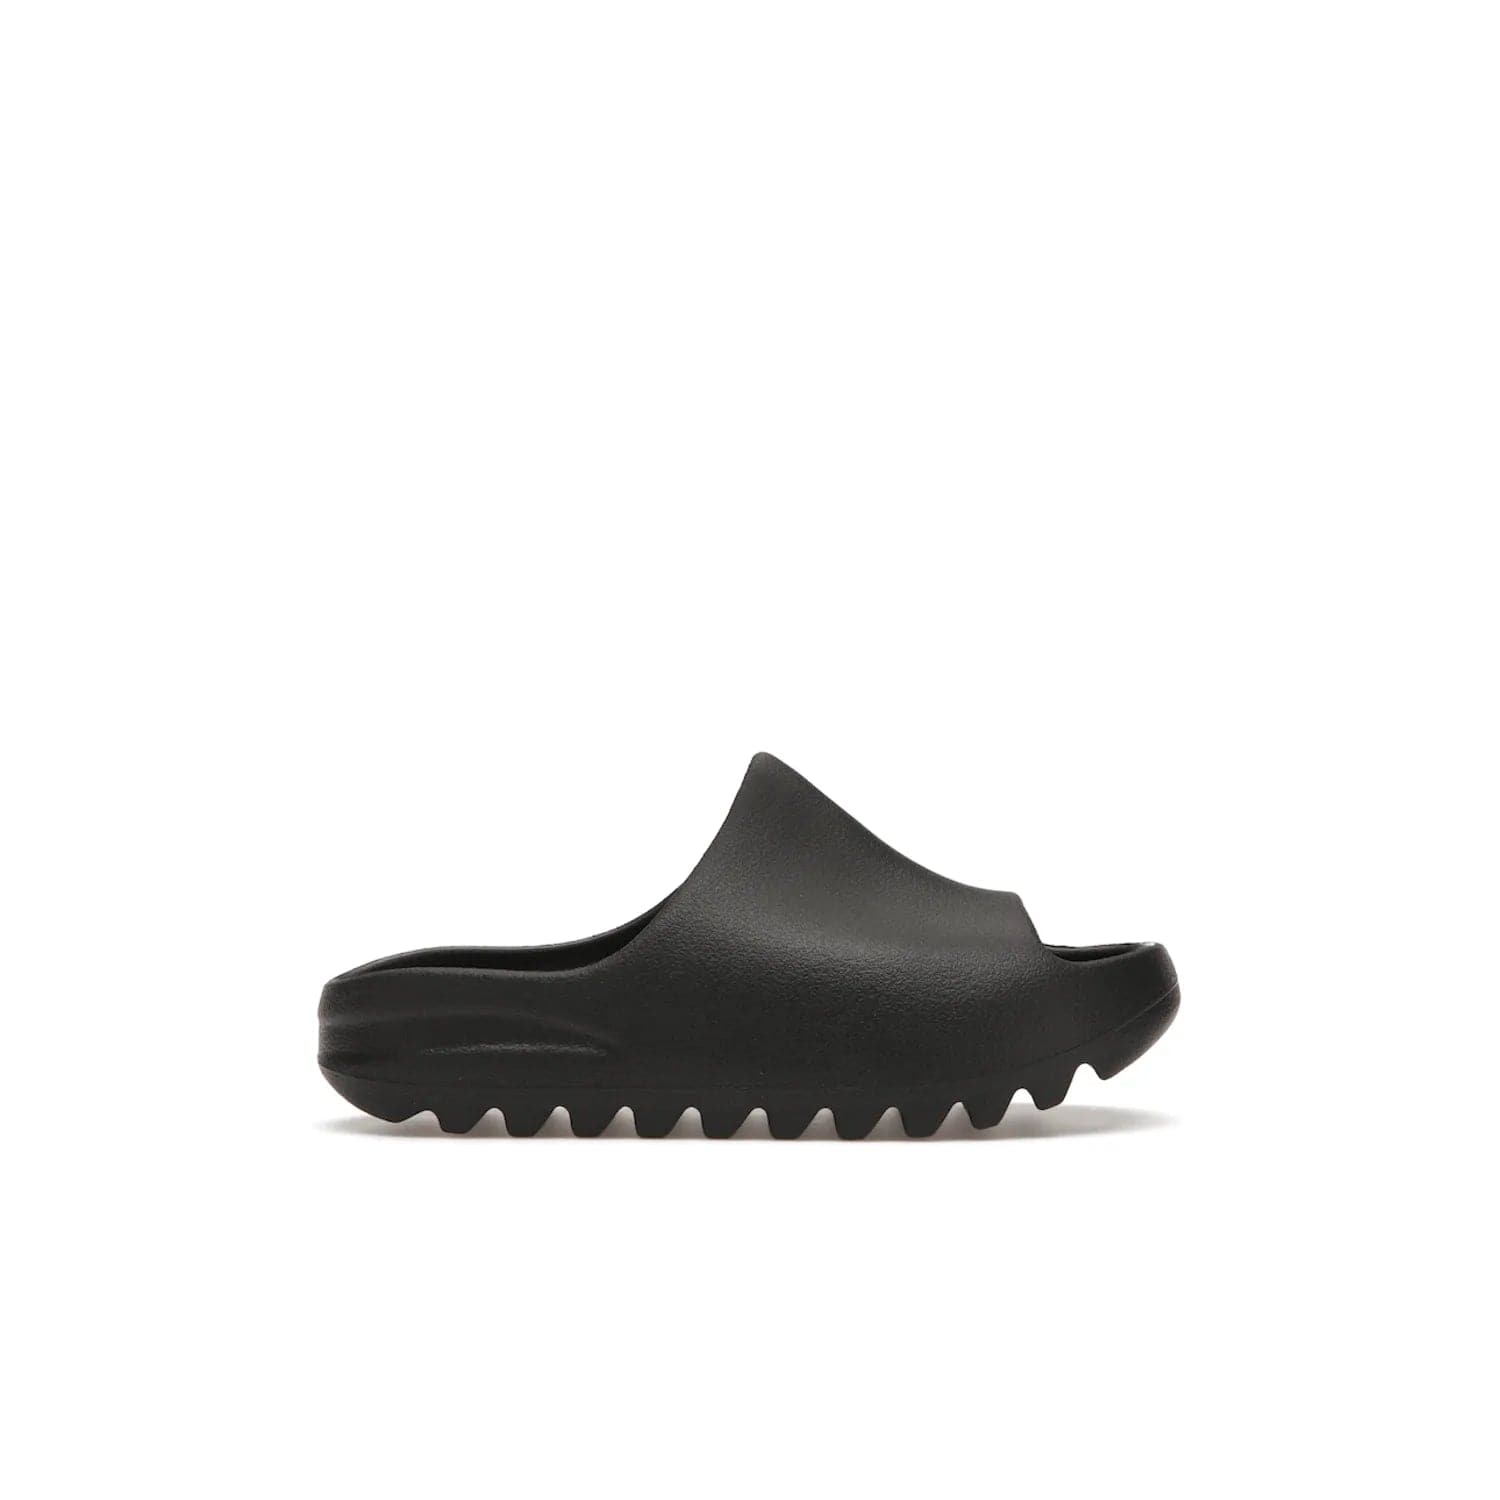 adidas Yeezy Slide Onyx (Kids) - Image 1 - Only at www.BallersClubKickz.com - adidas Yeezy Slide Onyx (Kids): Comfortable foam construction with textured surface and iconic three-stripe logo. Breathable, open-toe design and deep grooves for traction. Released in March 2021 at $50.